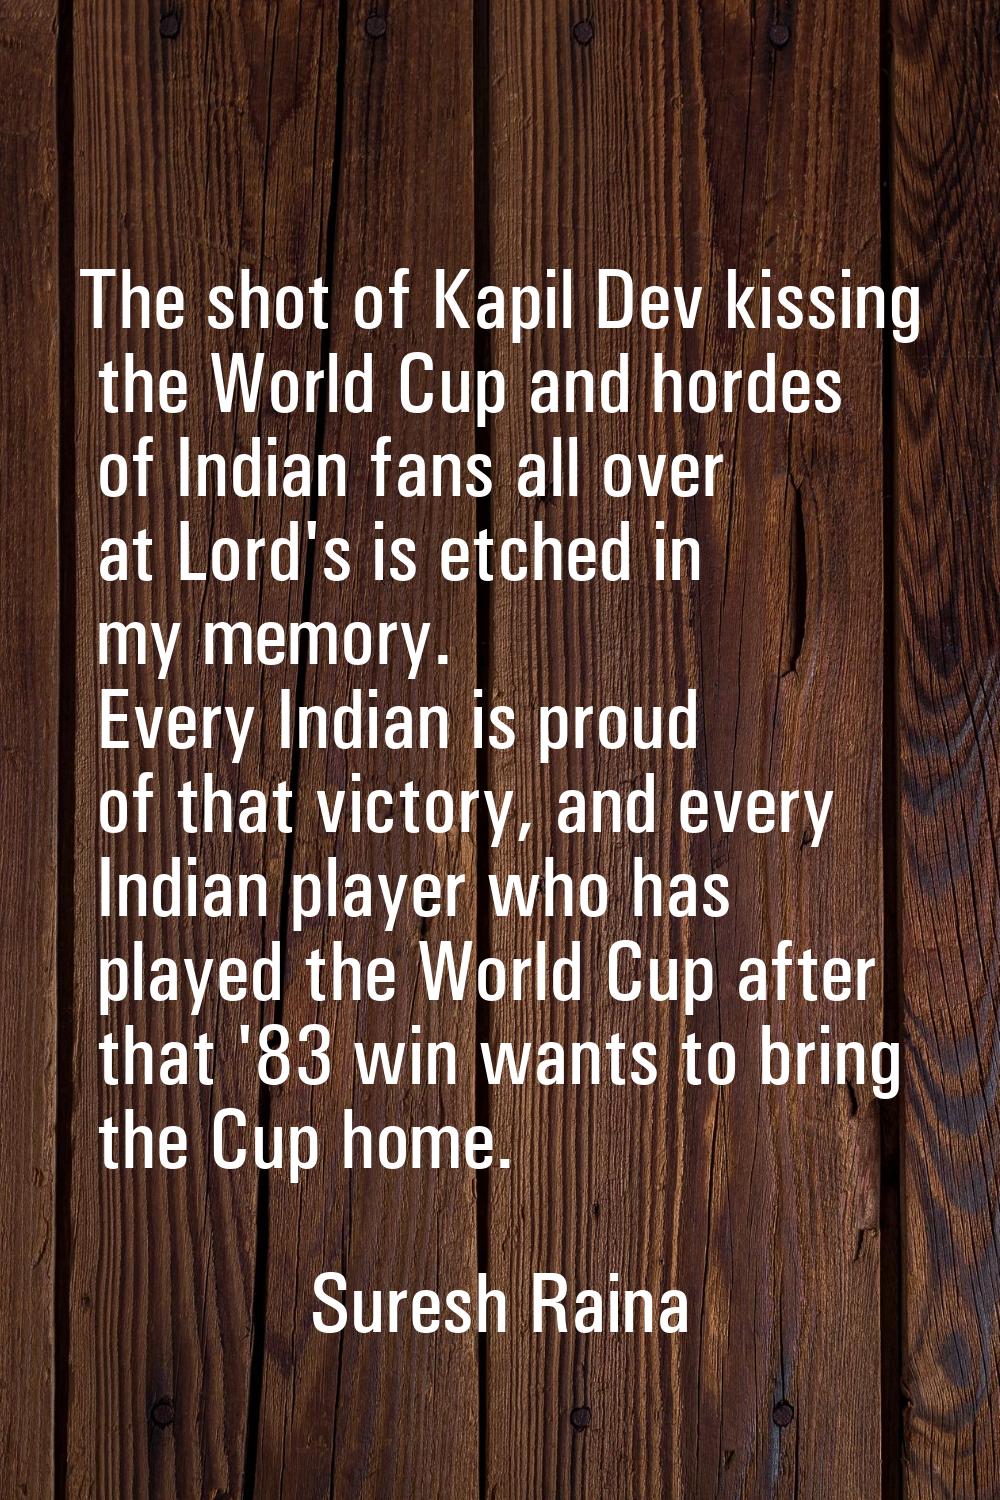 The shot of Kapil Dev kissing the World Cup and hordes of Indian fans all over at Lord's is etched 